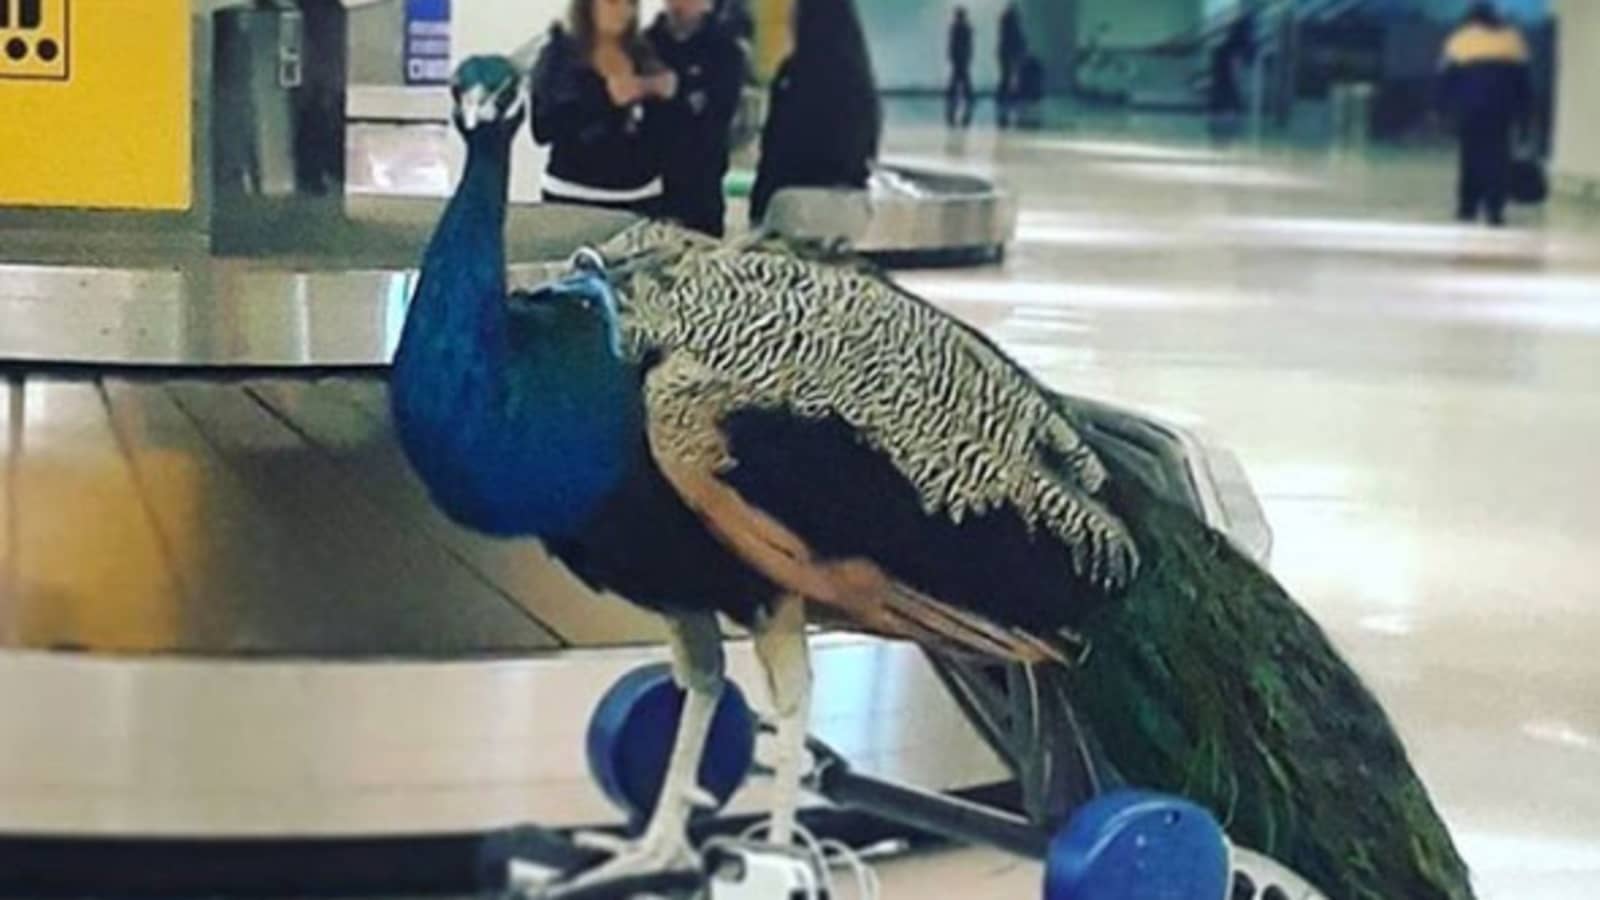 United Refused To Let An Emotional Support Peacock Board Plane